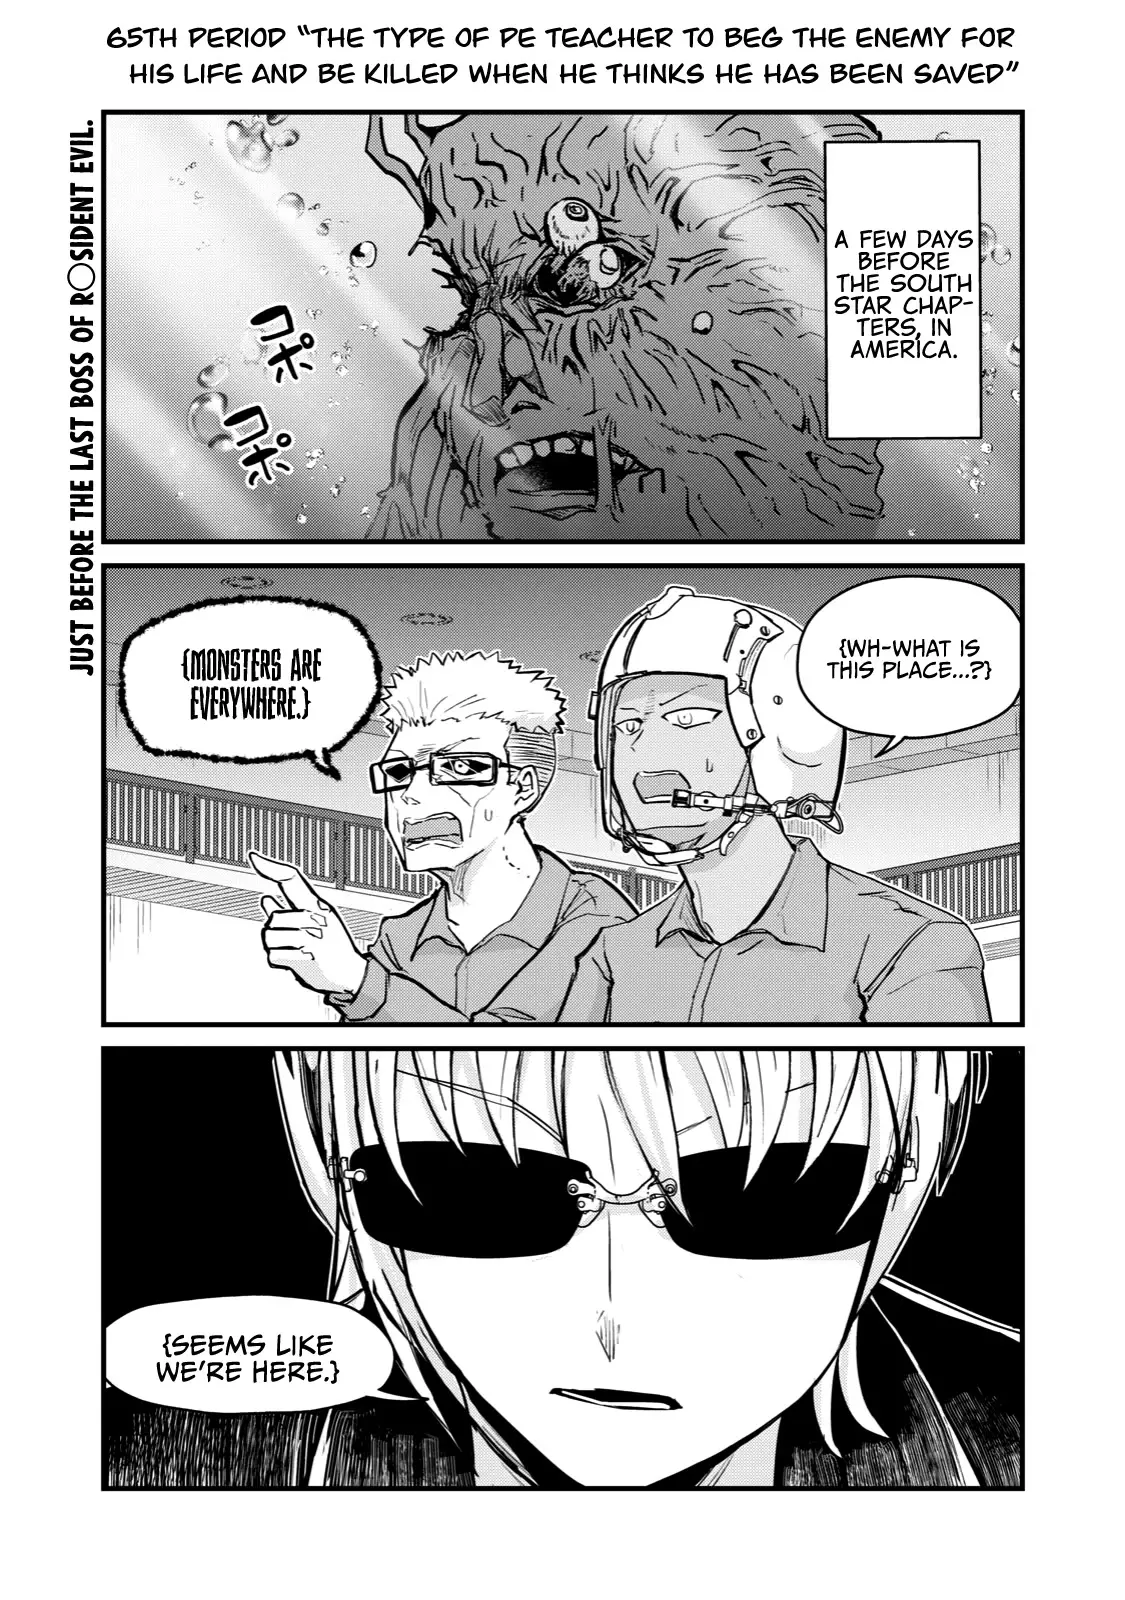 A Manga About The Kind Of Pe Teacher Who Dies At The Start Of A School Horror Movie - 65 page 1-dcbbf4b1